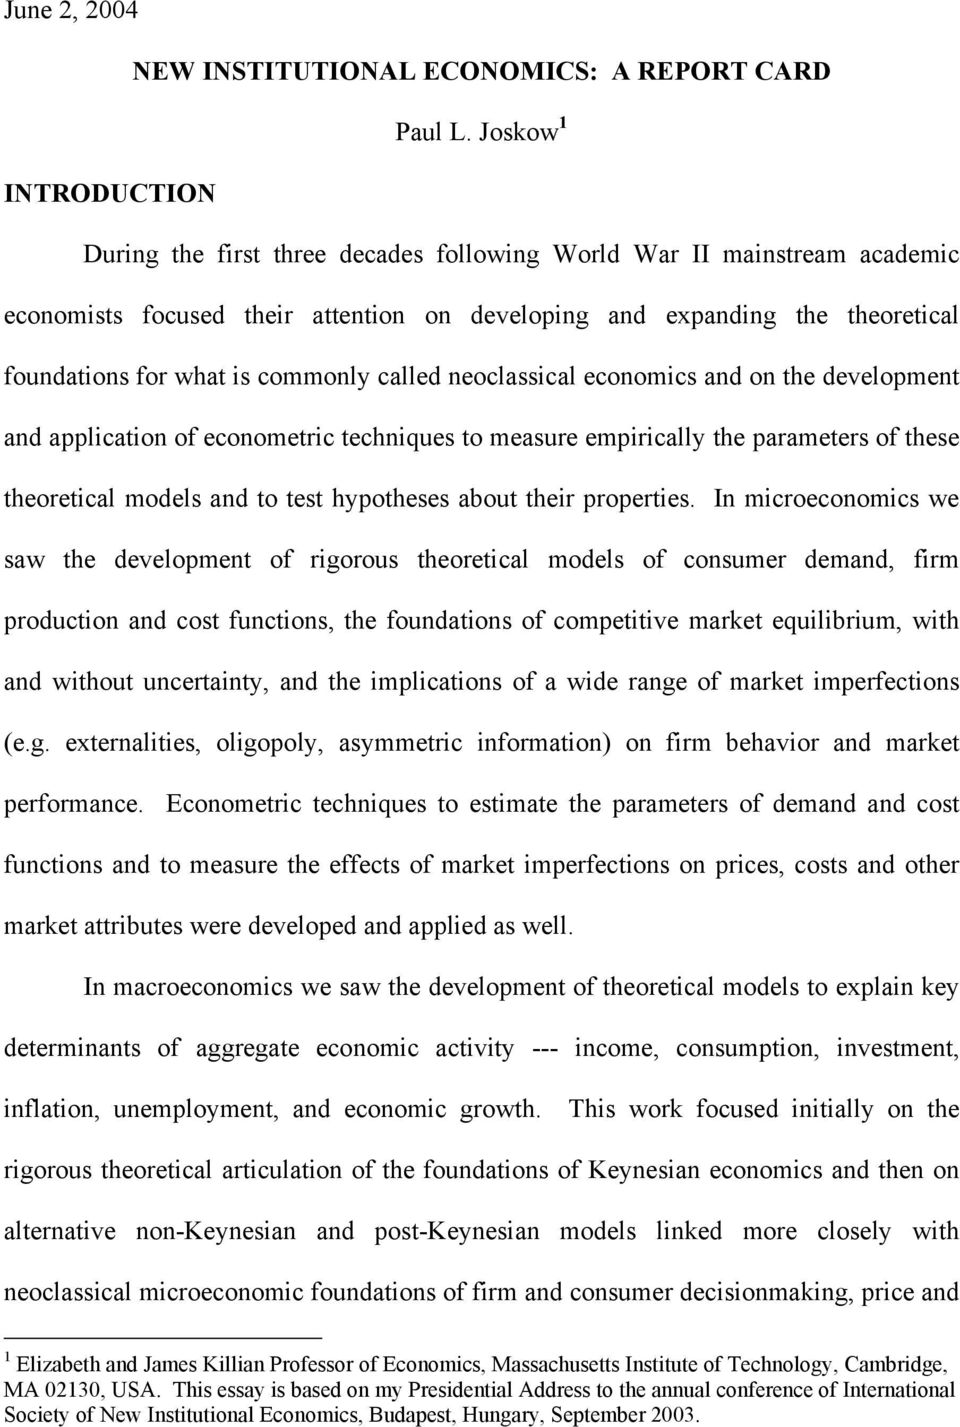 commonly called neoclassical economics and on the development and application of econometric techniques to measure empirically the parameters of these theoretical models and to test hypotheses about